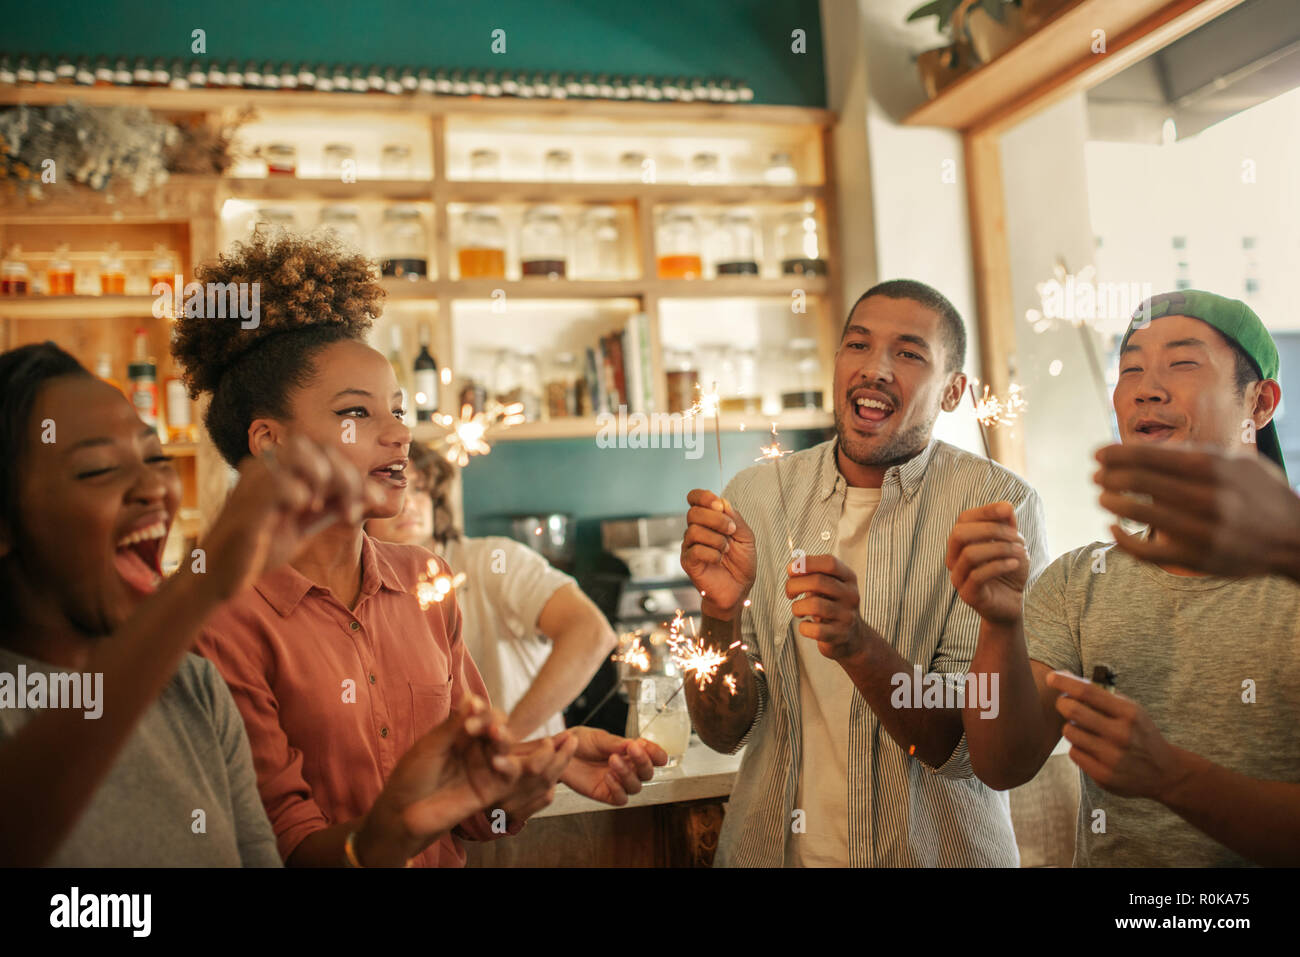 Laughing group of friends celebrating with sparklers in a bar Stock Photo